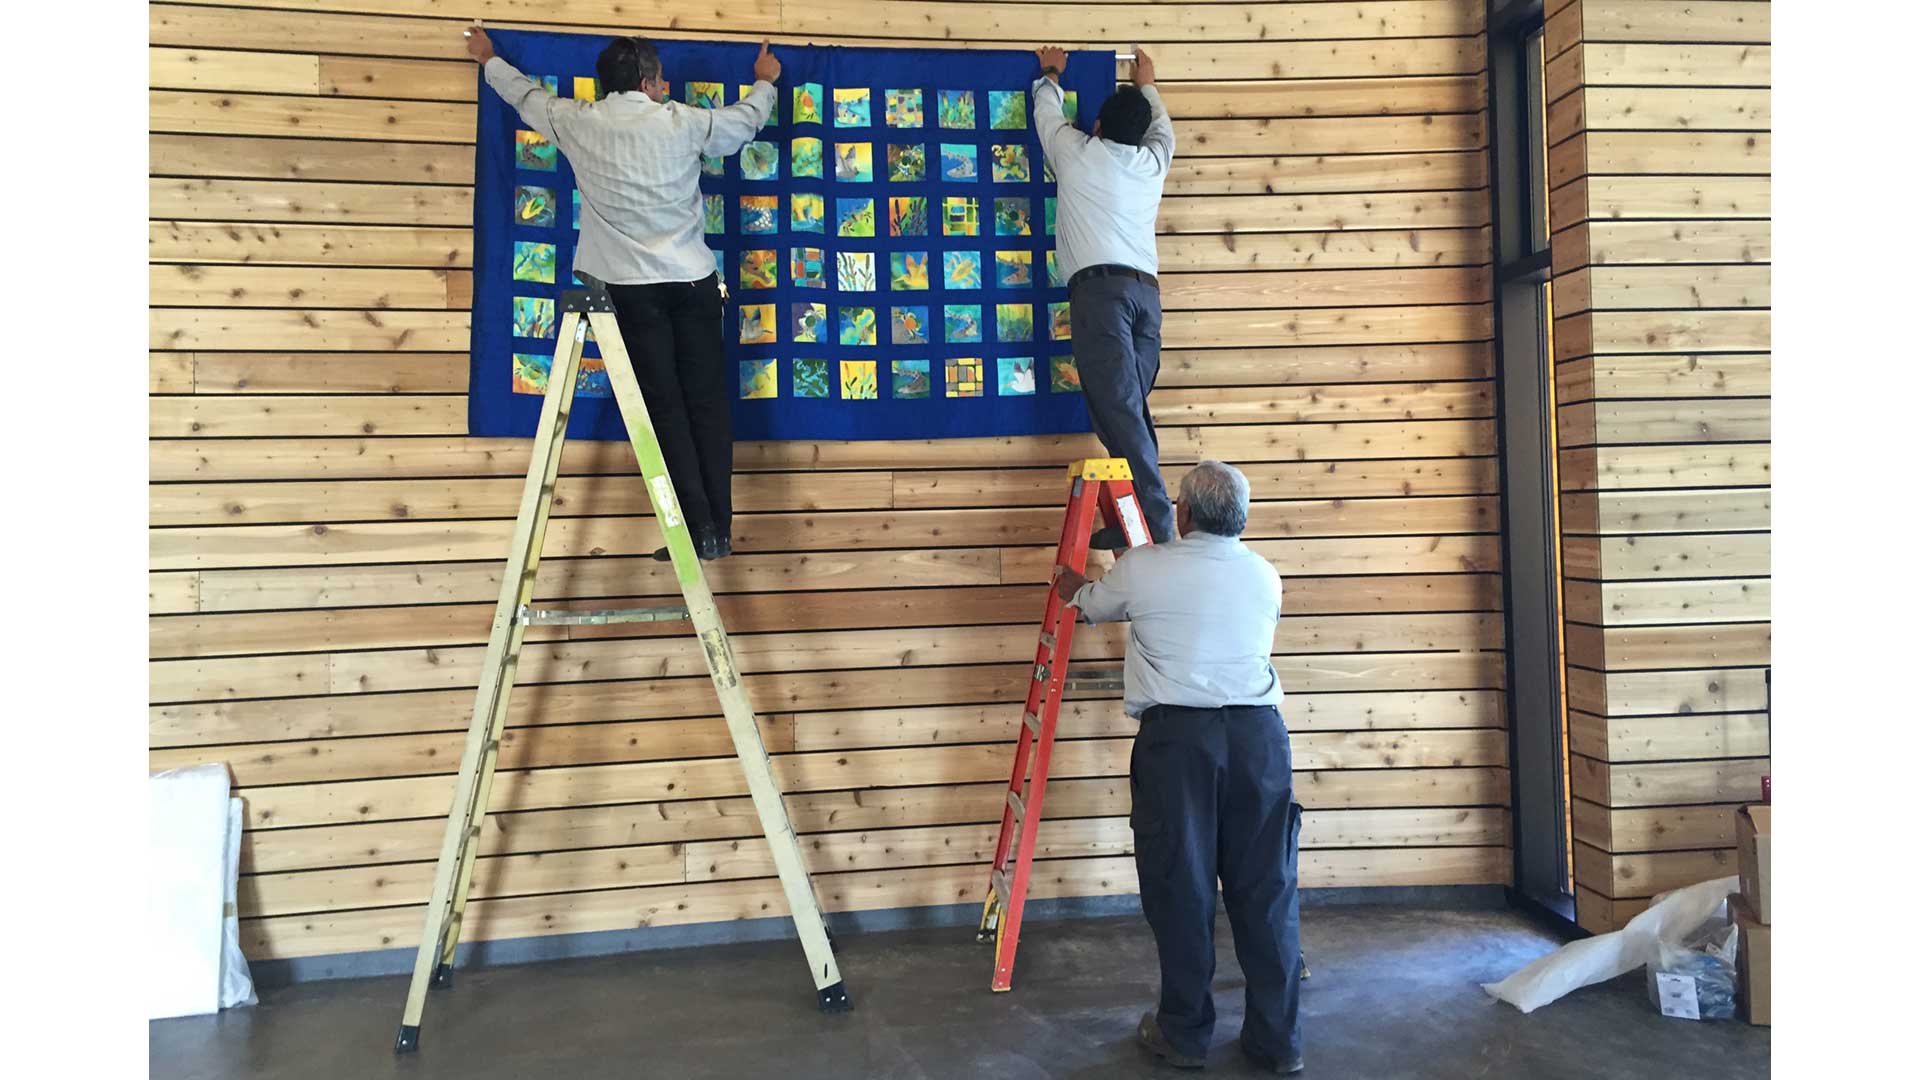 Installing the final quilt at the Cooley Landing Education Center